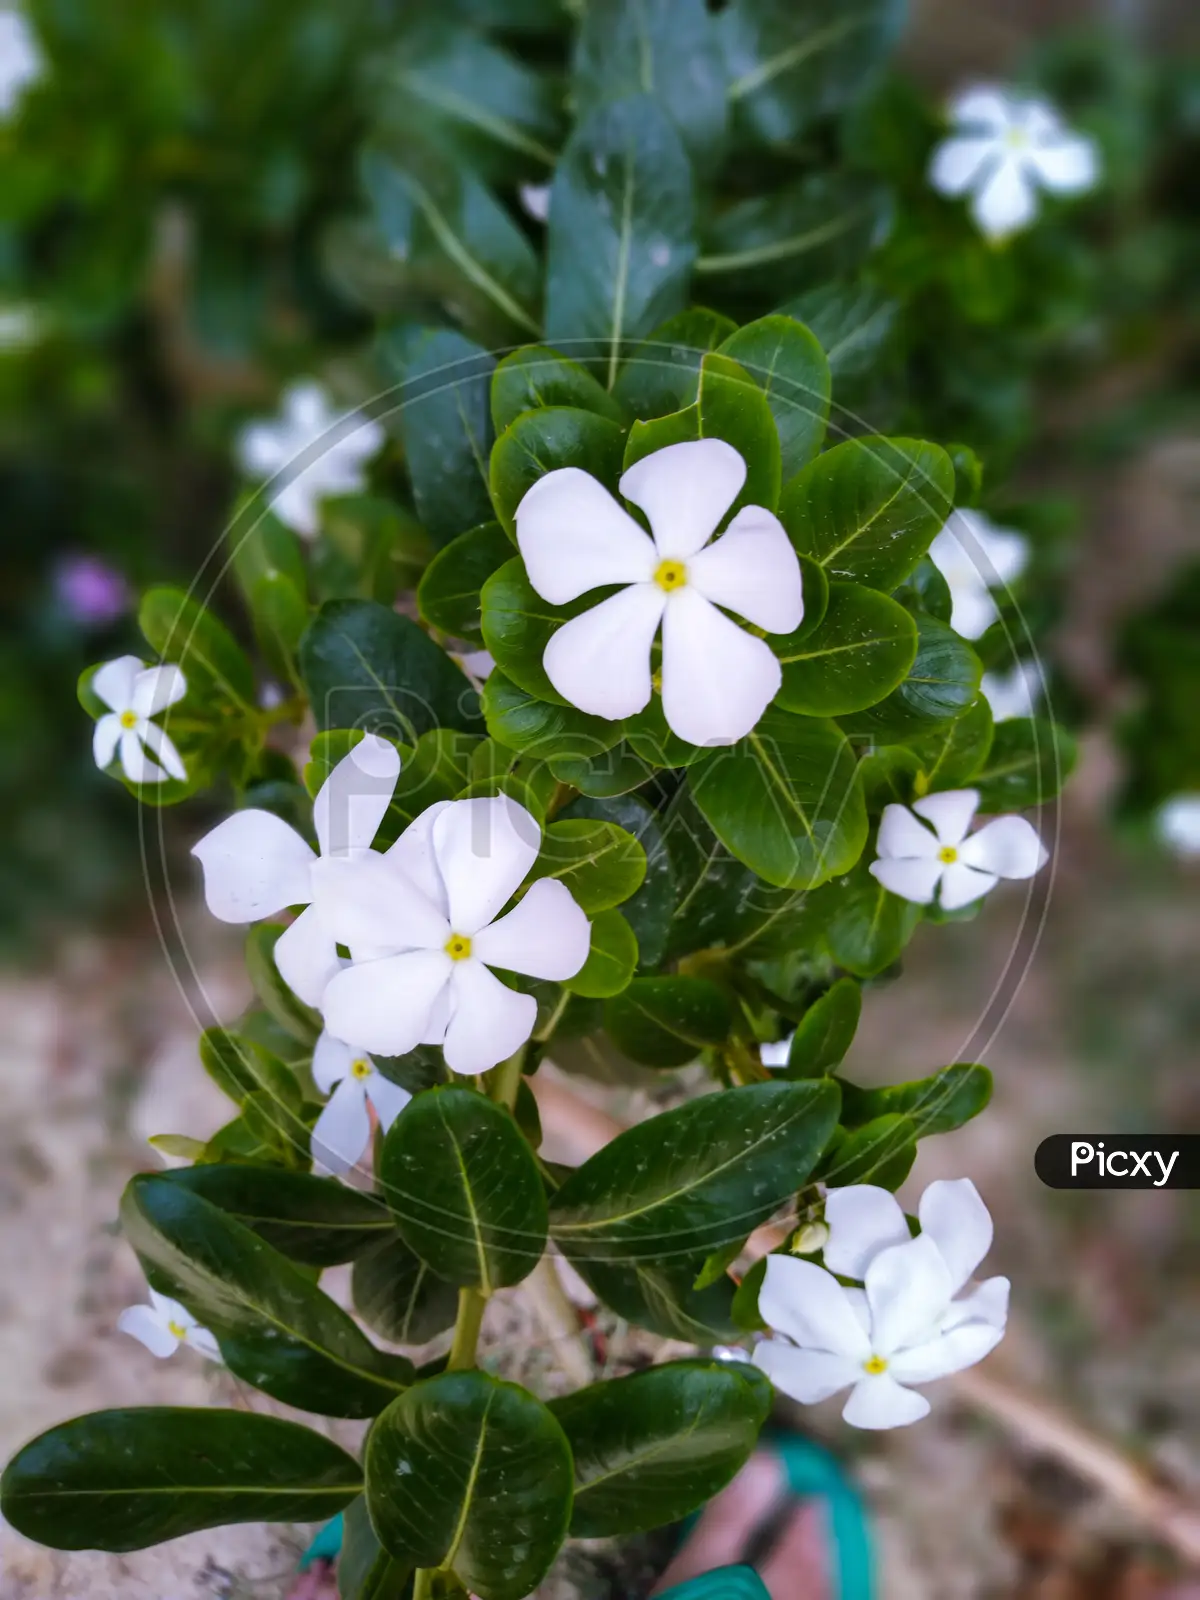 image of periwinkle white colour flower-rs902419-picxy